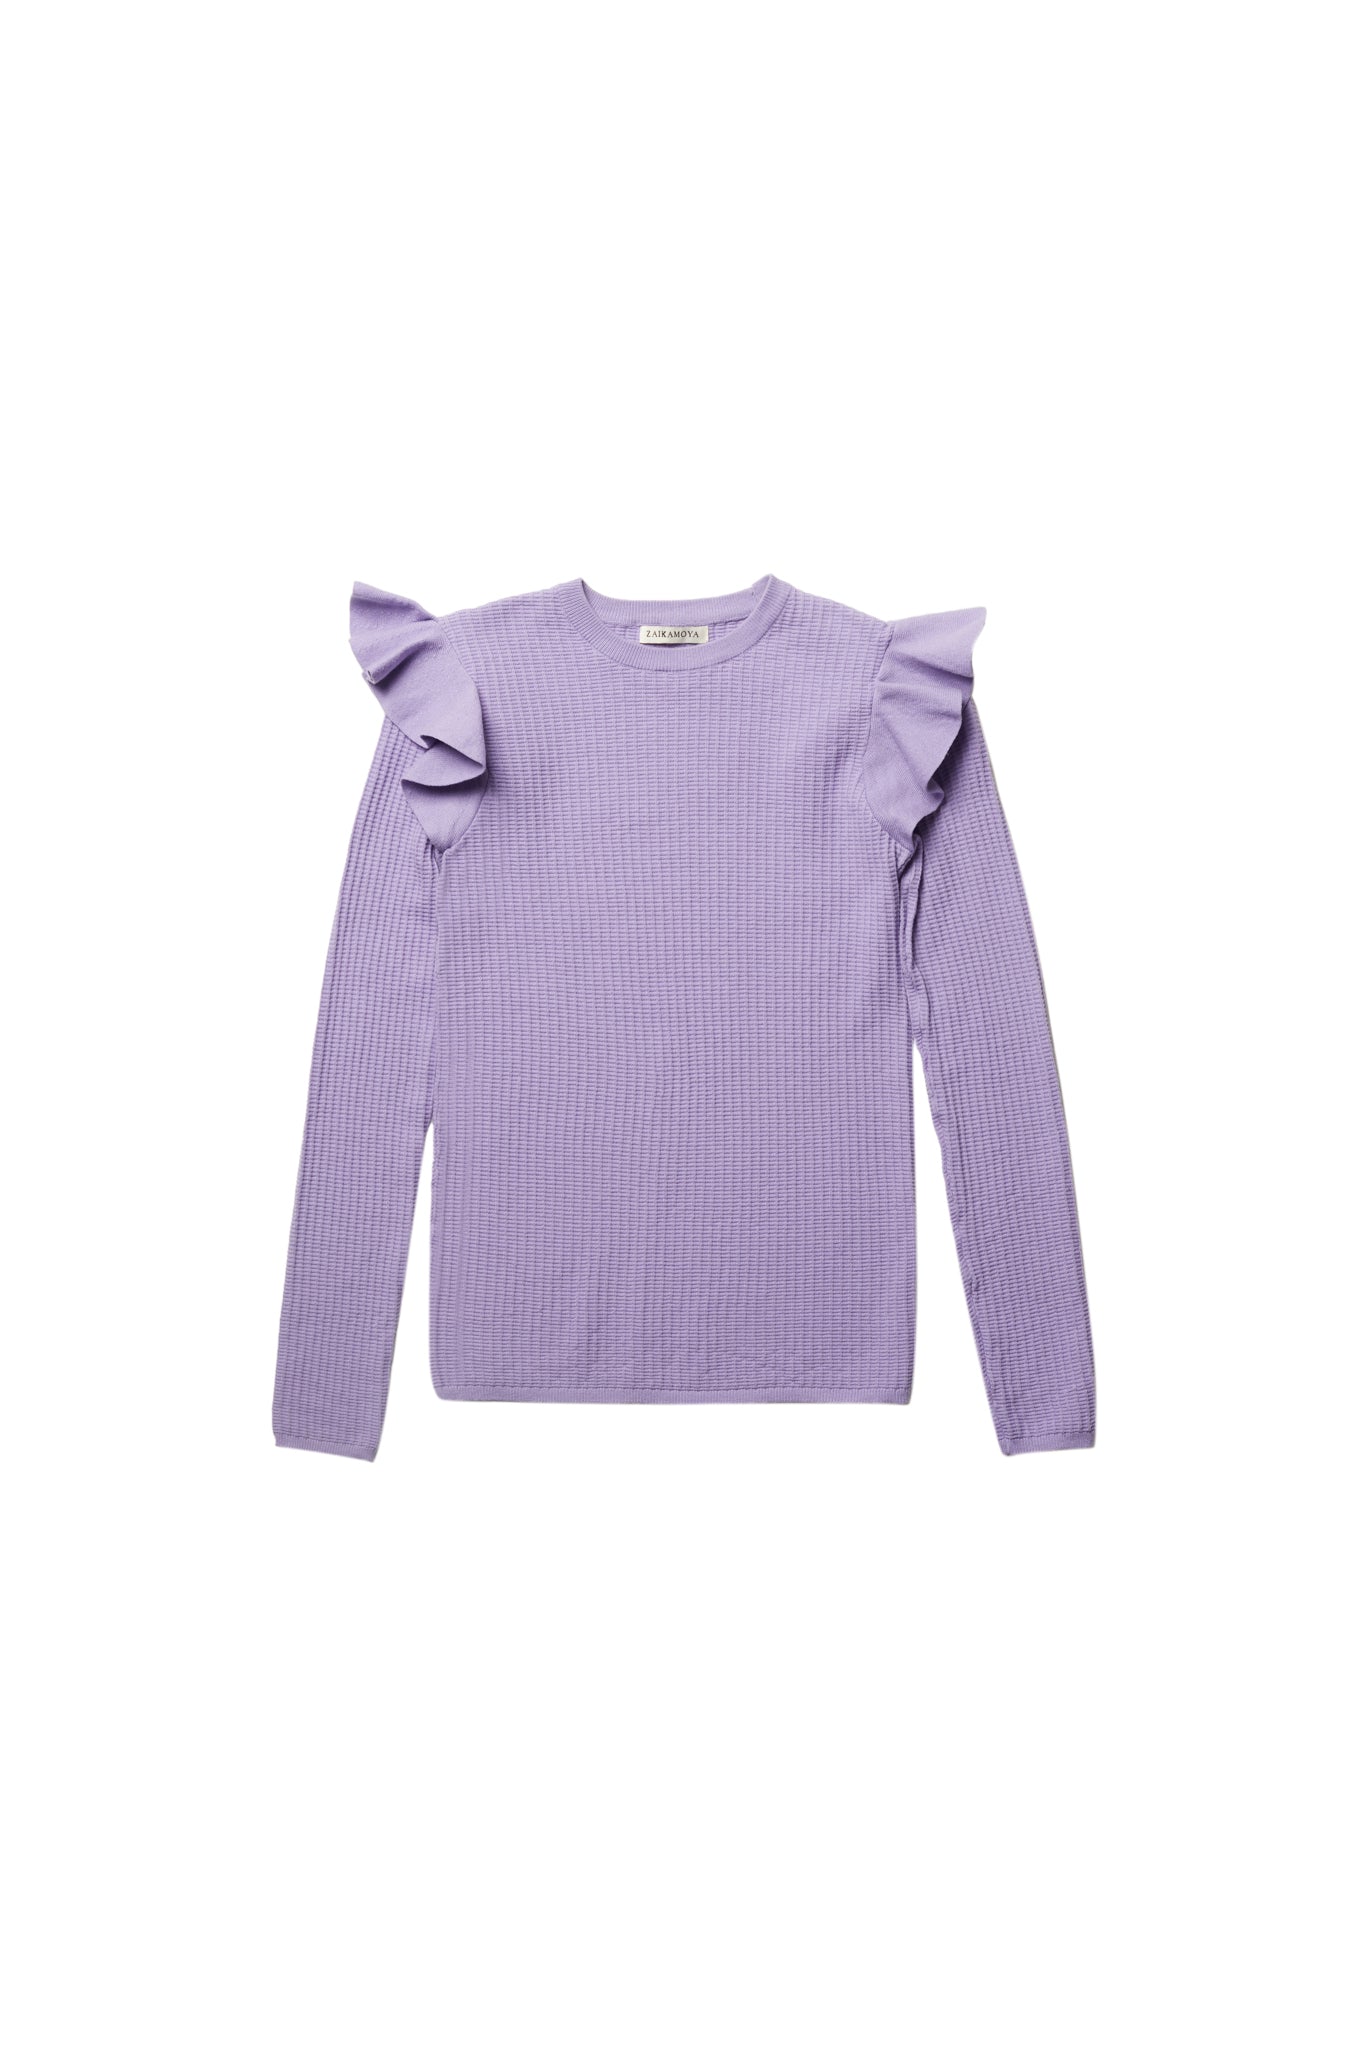 Lilac Textured Sweater #1627W FINAL SALE